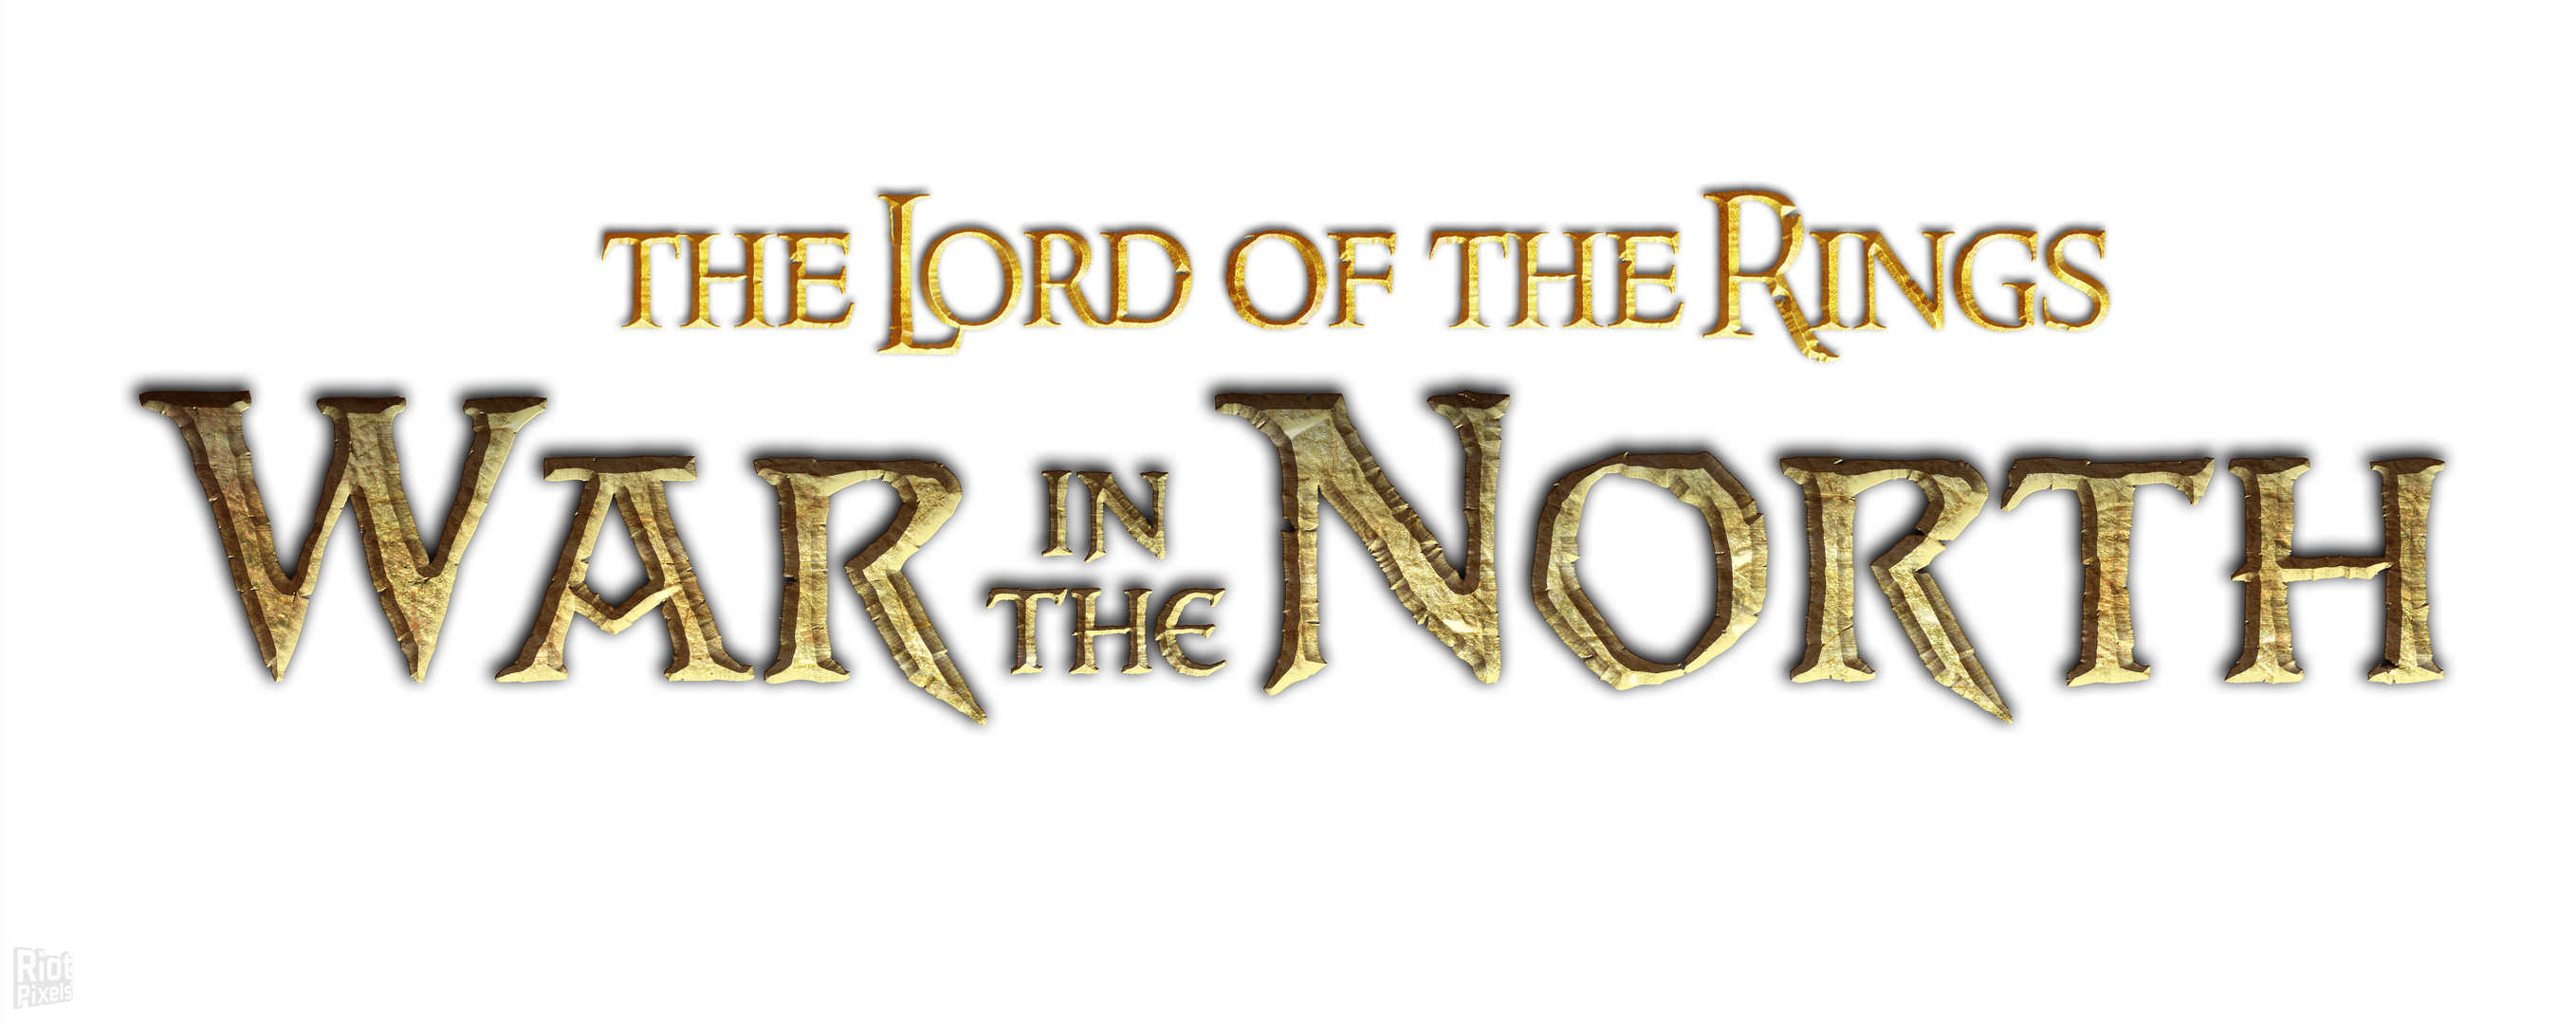 Lord of the rings war in the north купить ключ steam фото 82